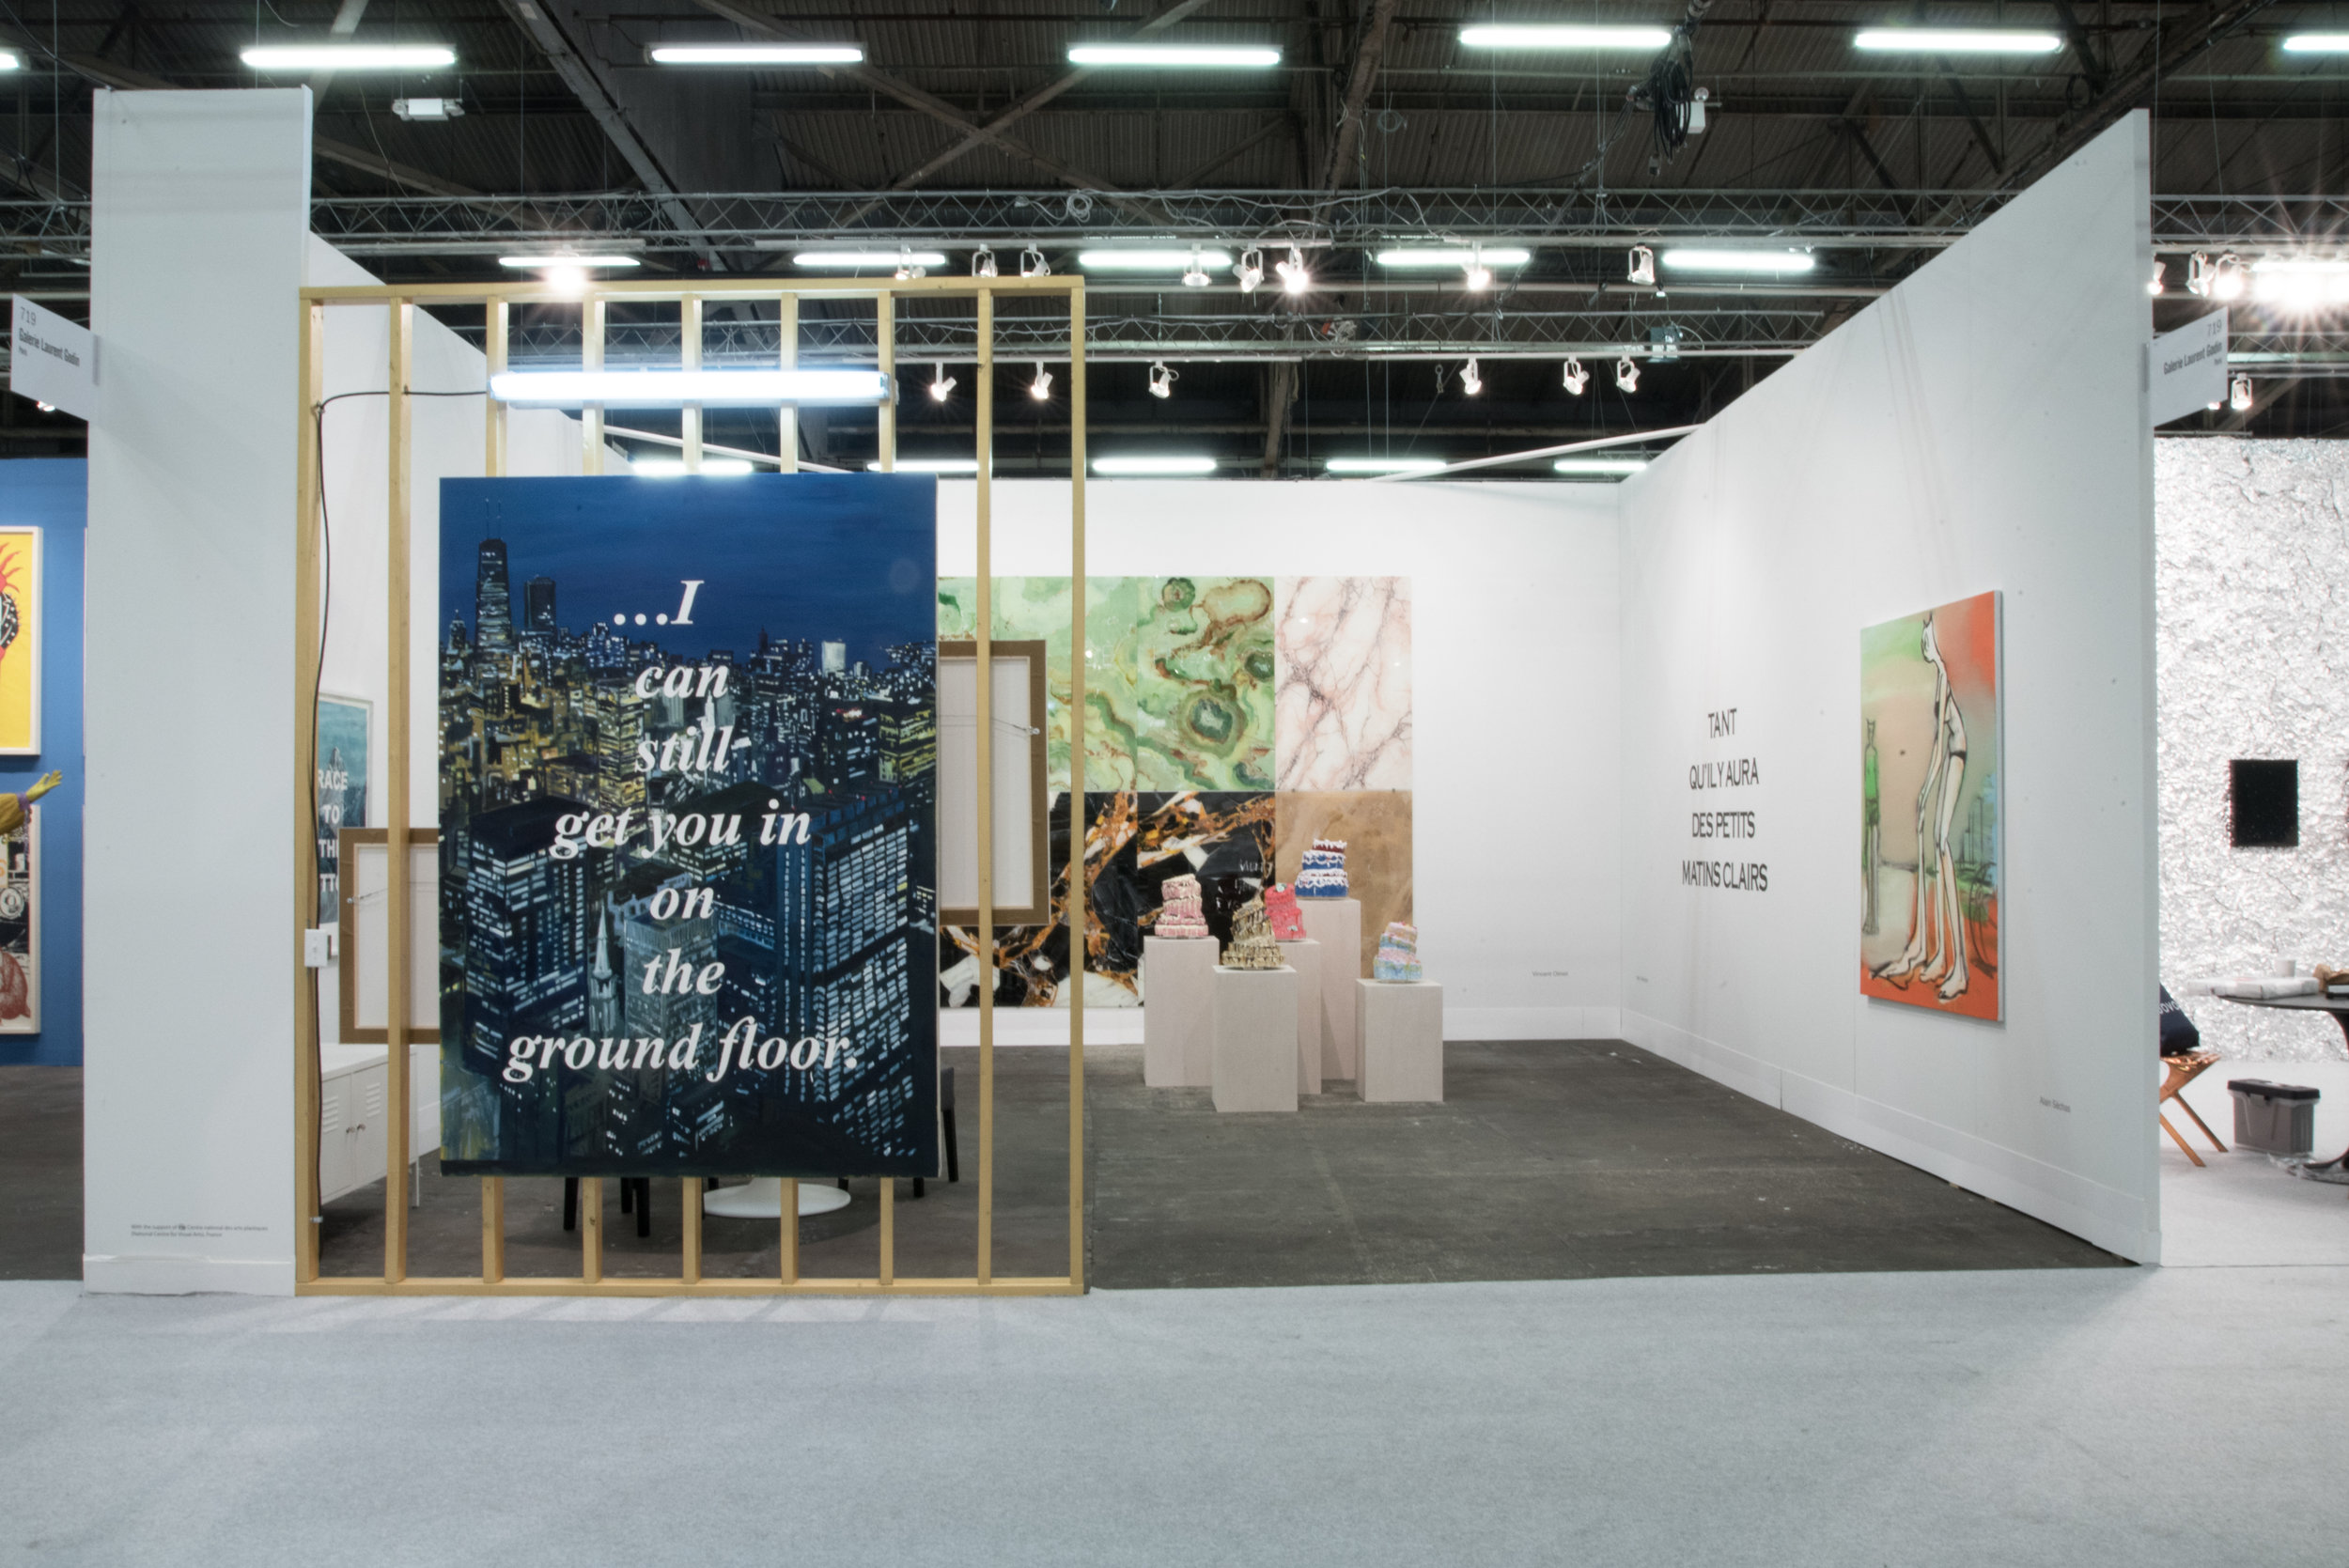  Fair view : Galerie Laurent Godin, Booth 719, March 2017 